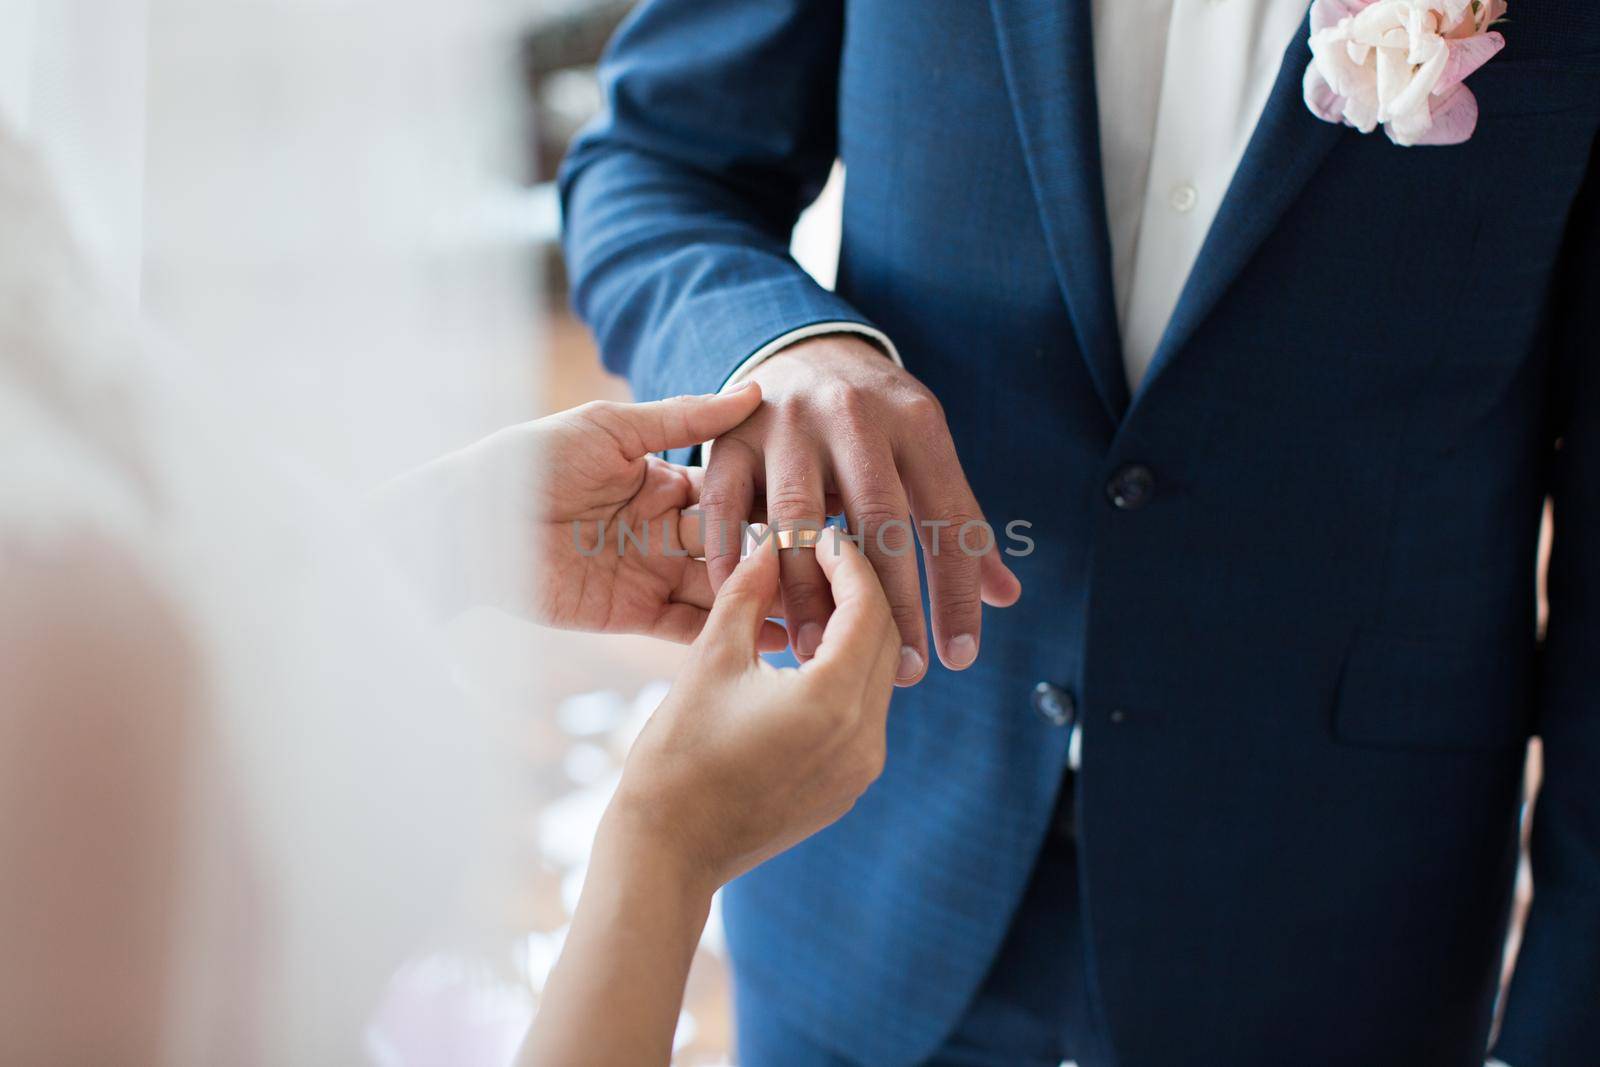 The bride puts a ring on the bride's finger during the wedding ceremony. by StudioPeace